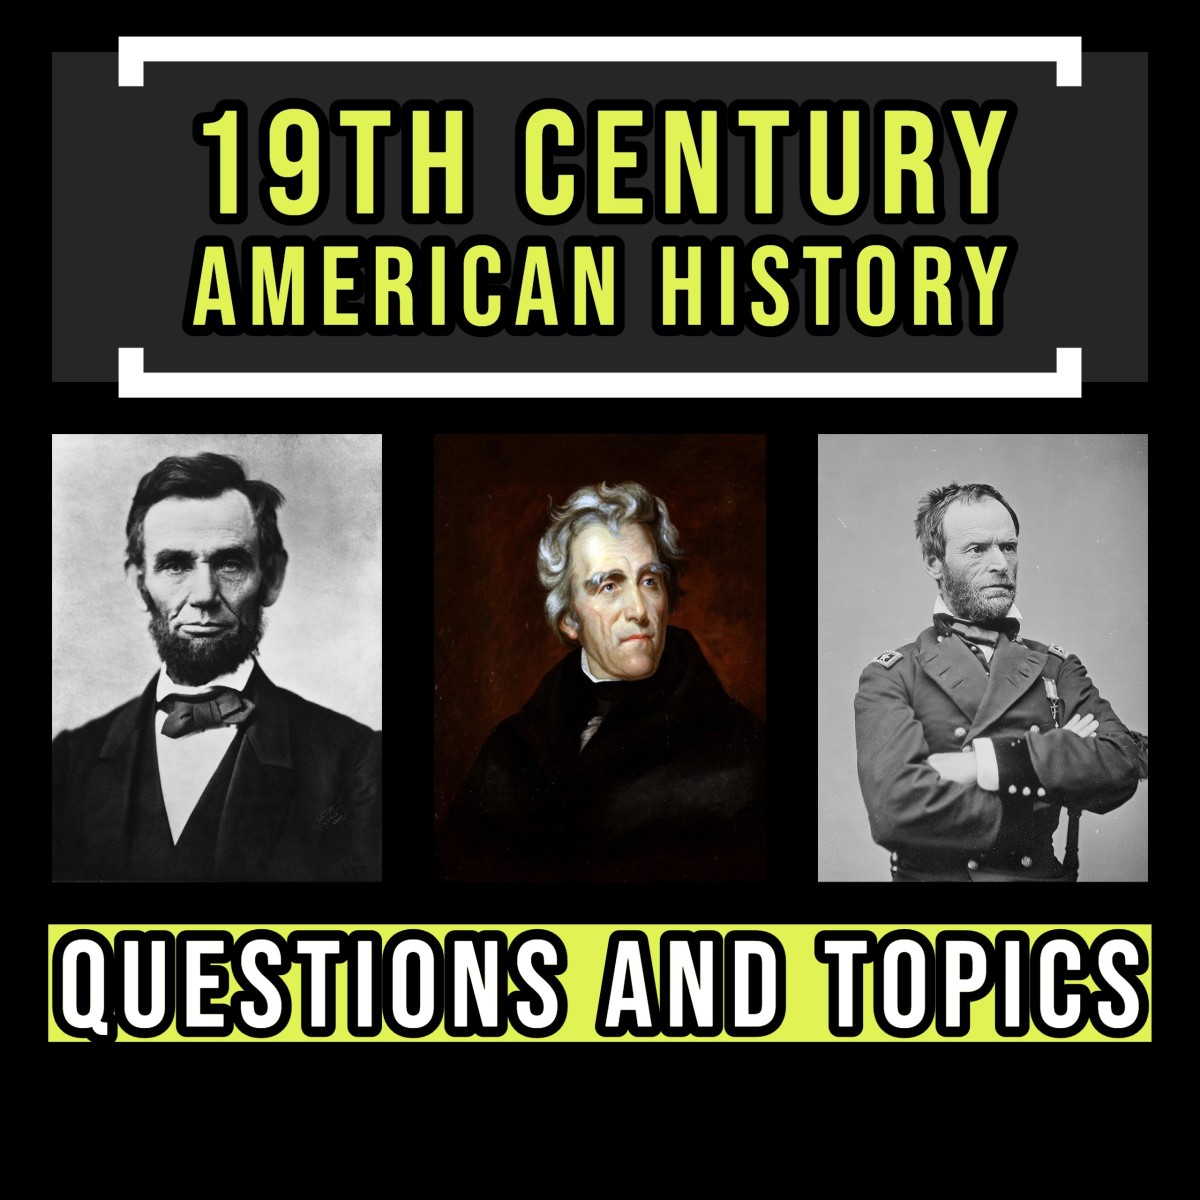 19th century american history research paper topics